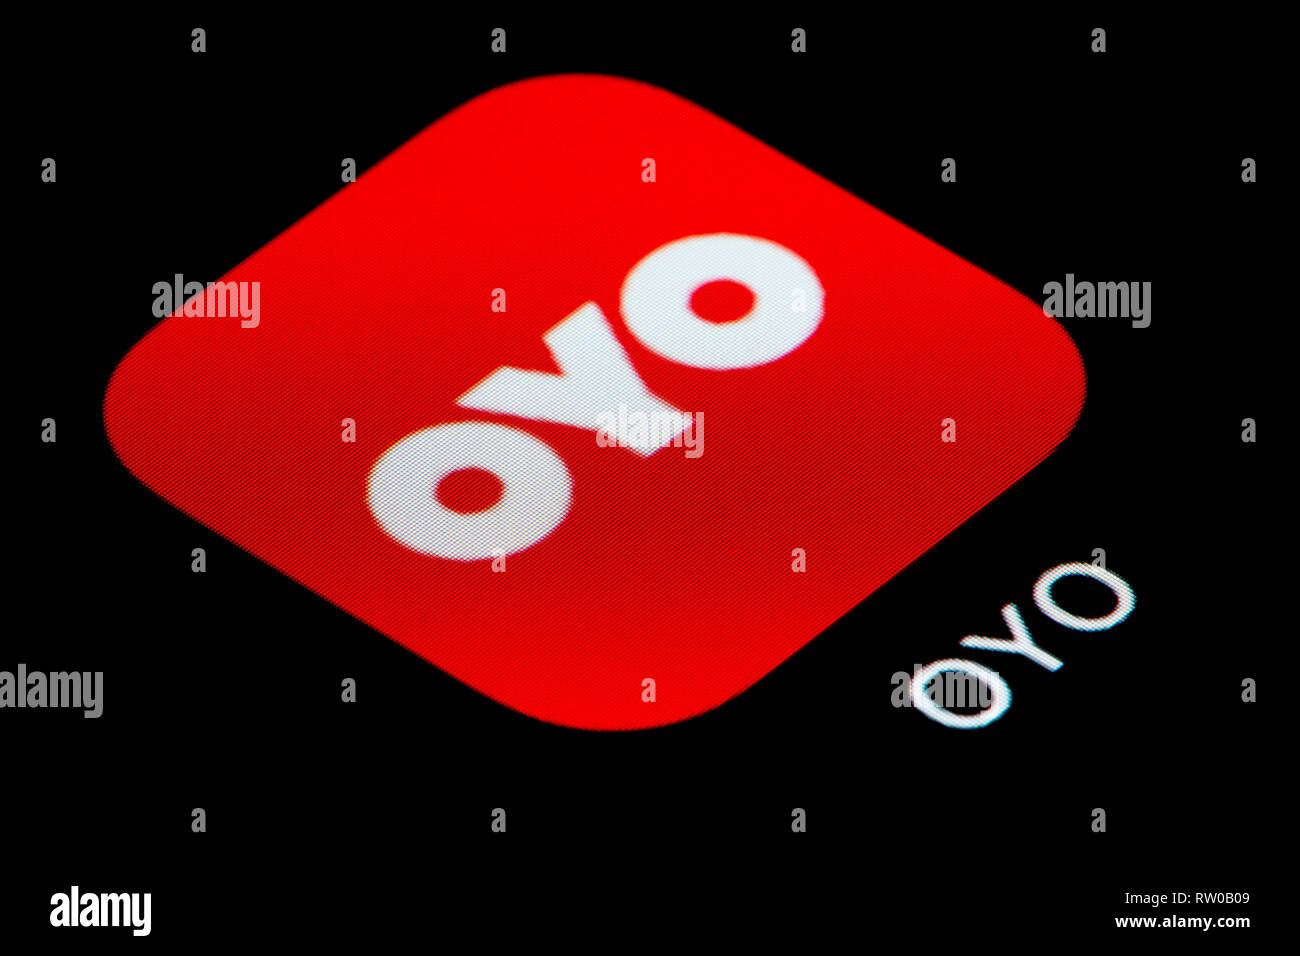 A close-up shot of the Oyo Rooms app icon, as seen on the screen of a smart phone (Editorial use only) Stock Photo